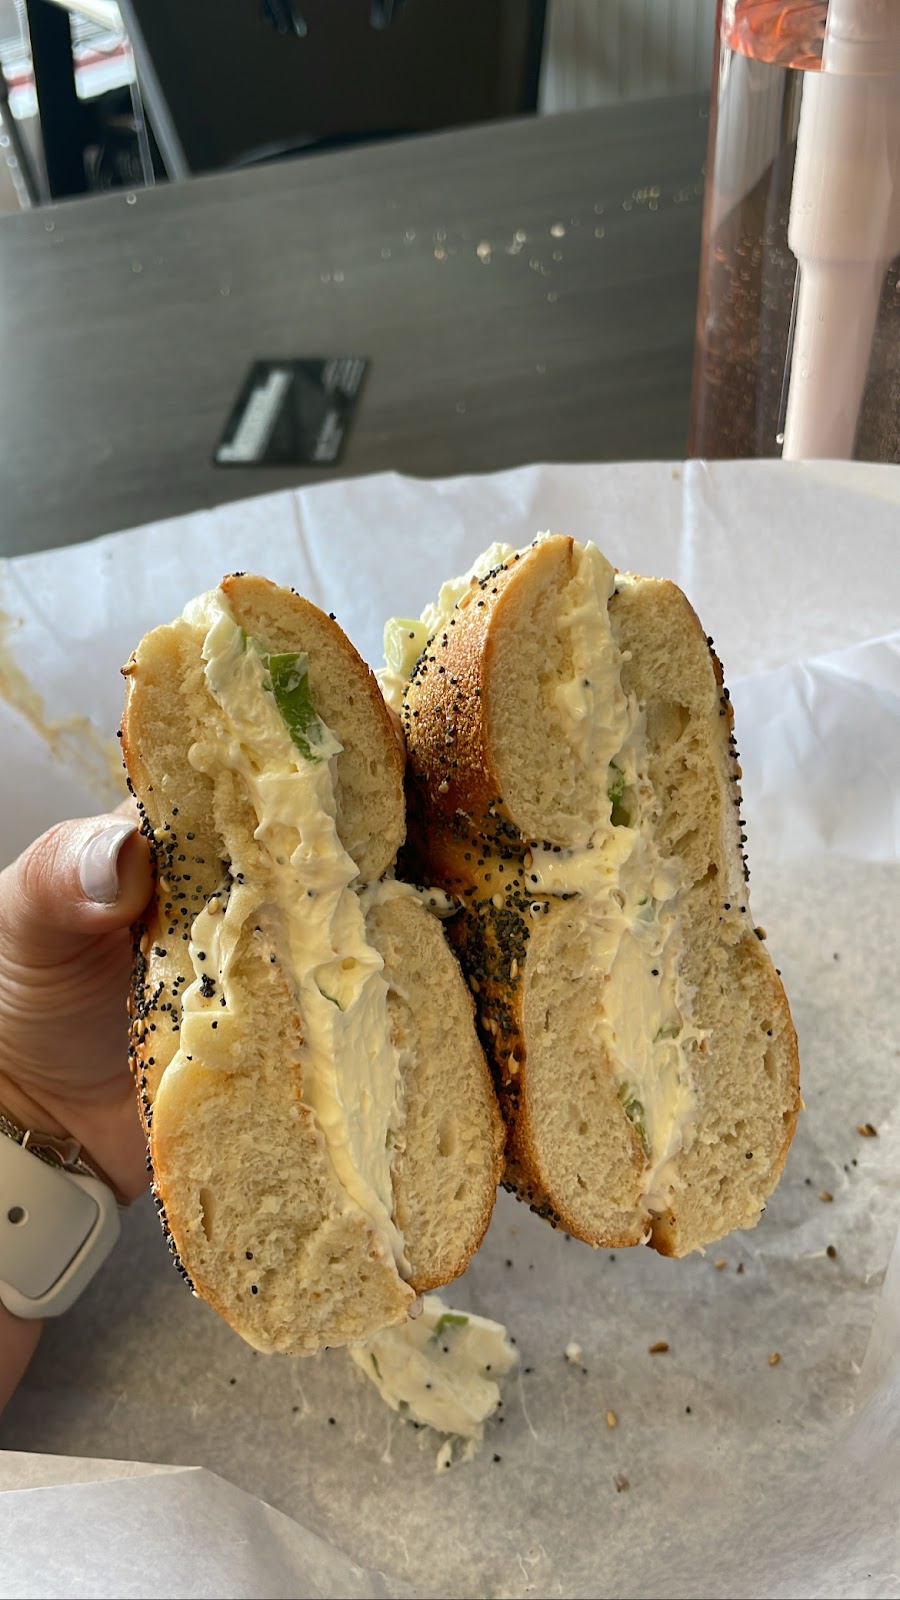 Goldbergs Famous Bagels | 801 County Rd 39, Southampton, NY 11968 | Phone: (631) 204-1046